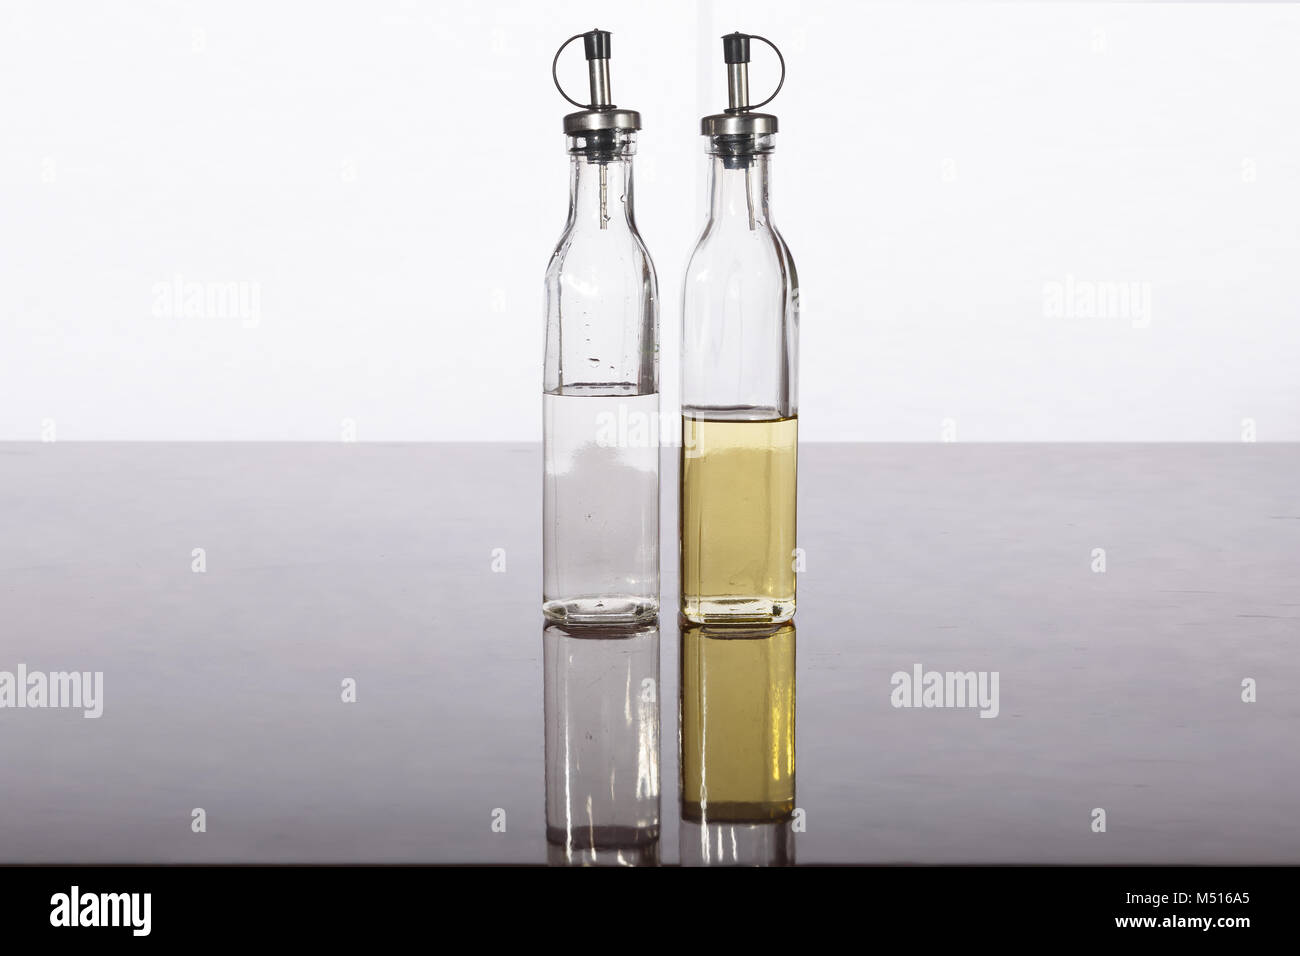 Olive oil and vinegar in bottles on a table Stock Photo